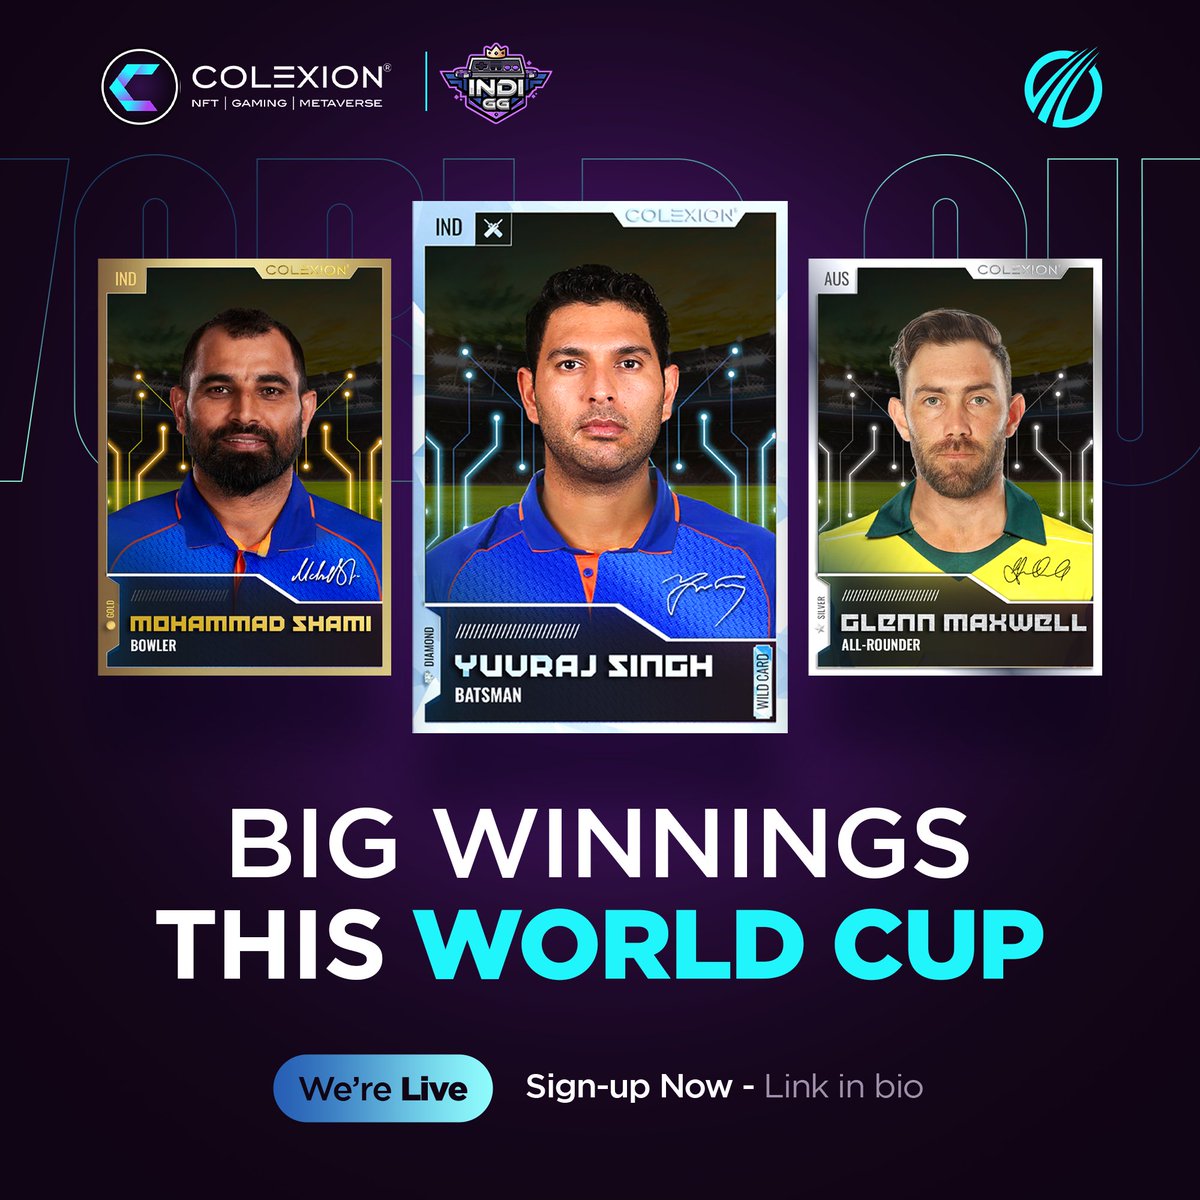 🔥ANNOUNCEMENT🔥: We are live with Top Run, the one-of-a-kind cricket strategy game where Cricket🏏 meets NFT for the first time. 

Play and start earning big. Sign up now ~ signup-indigg.colexion.io

#cricket #WorldCup2022 #cricketnft